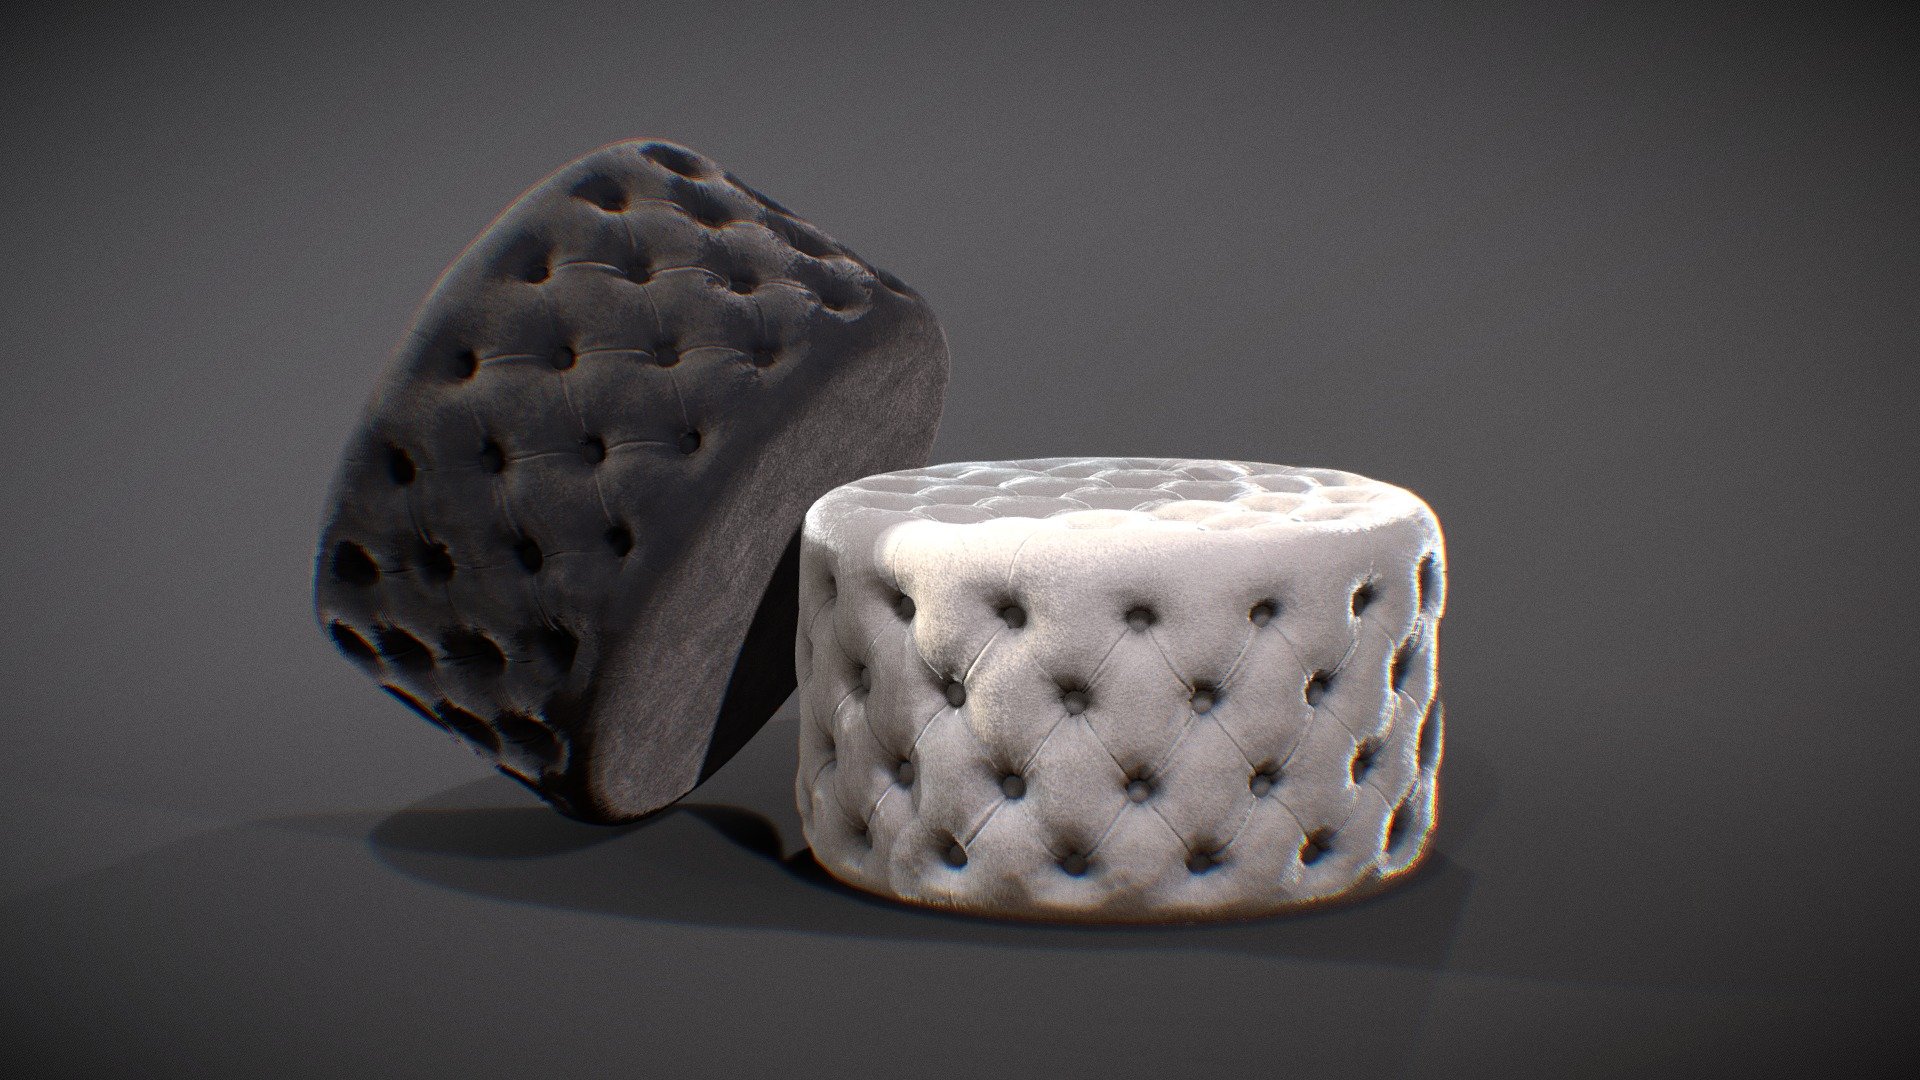 It is a 3d model of Ottoman for using as living-room furniture. It is can be used as a seating padded cushion in games and many other interior render scenes.

This model is created in 3ds Max and textured in Substance Painter.

This model is made in real proportions.

High quality of textures are available to download.

Metal-ness workflow- Base Color, Normal, Ambient Occlusion and Roughness Textures 3d model